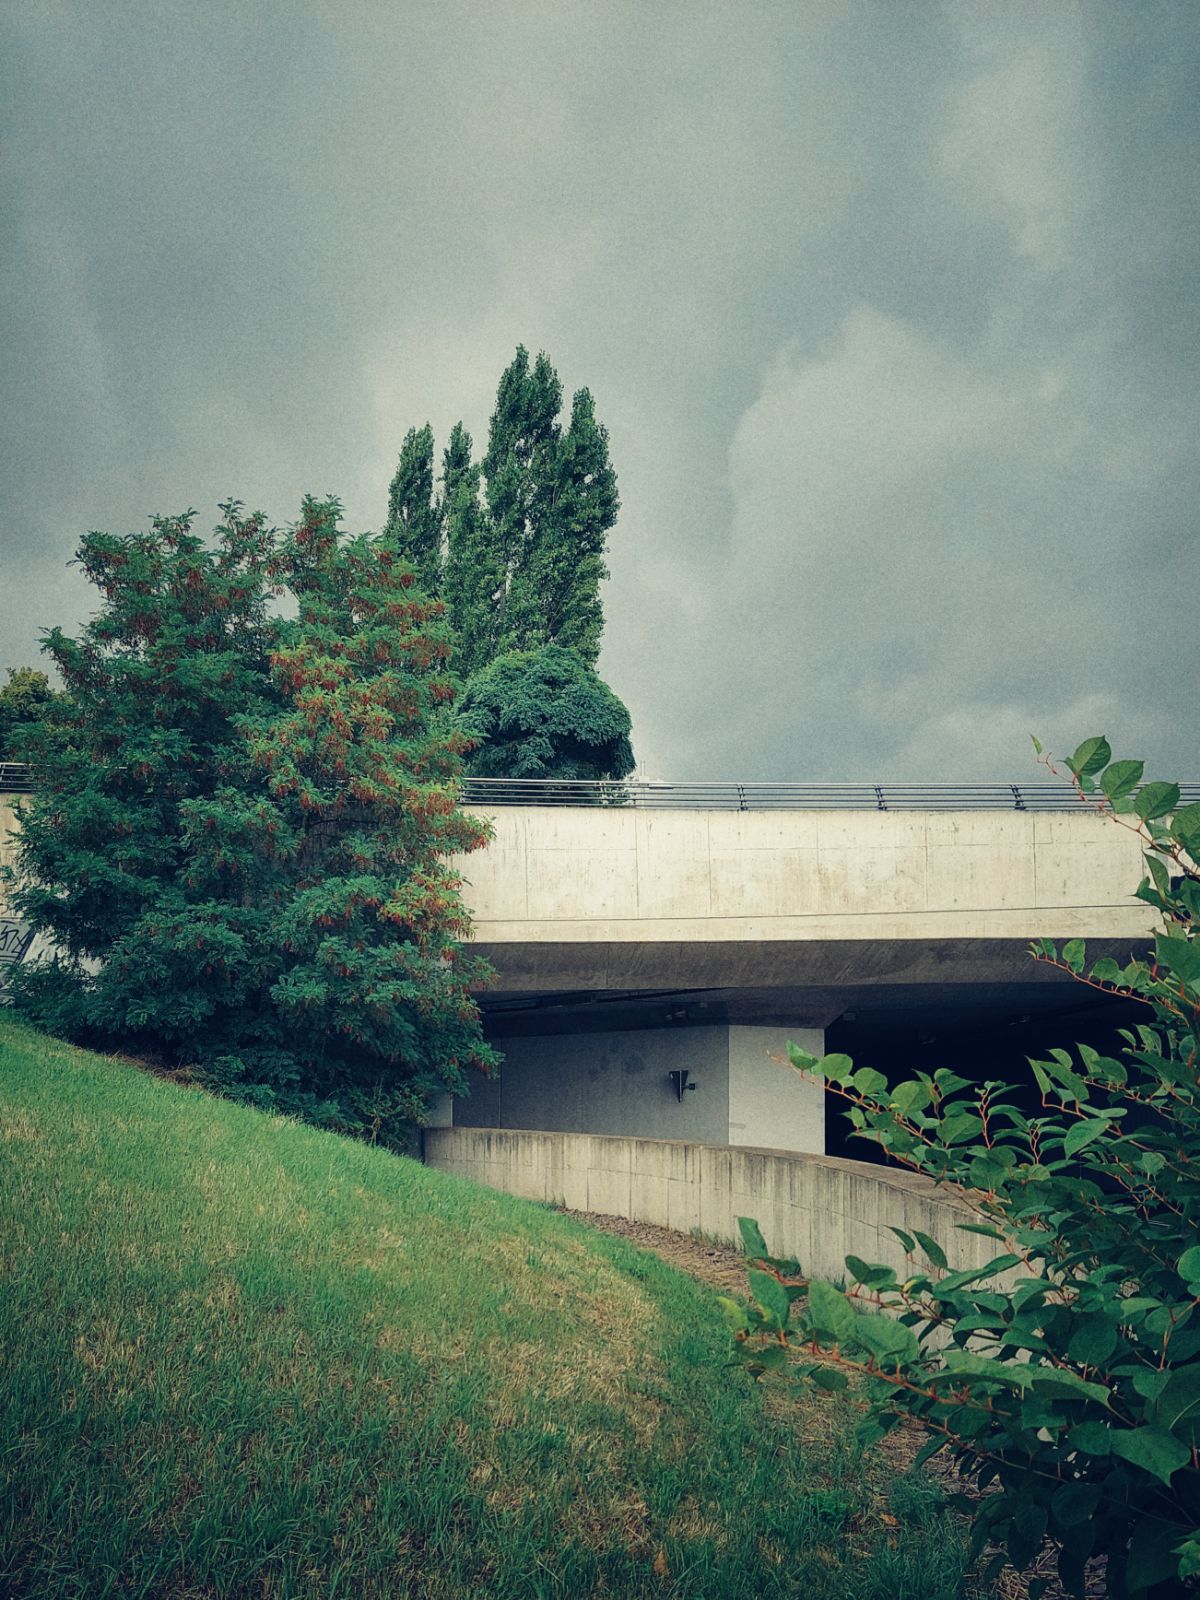 Concrete structure surrounded by meadow and trees. Dark sky above.